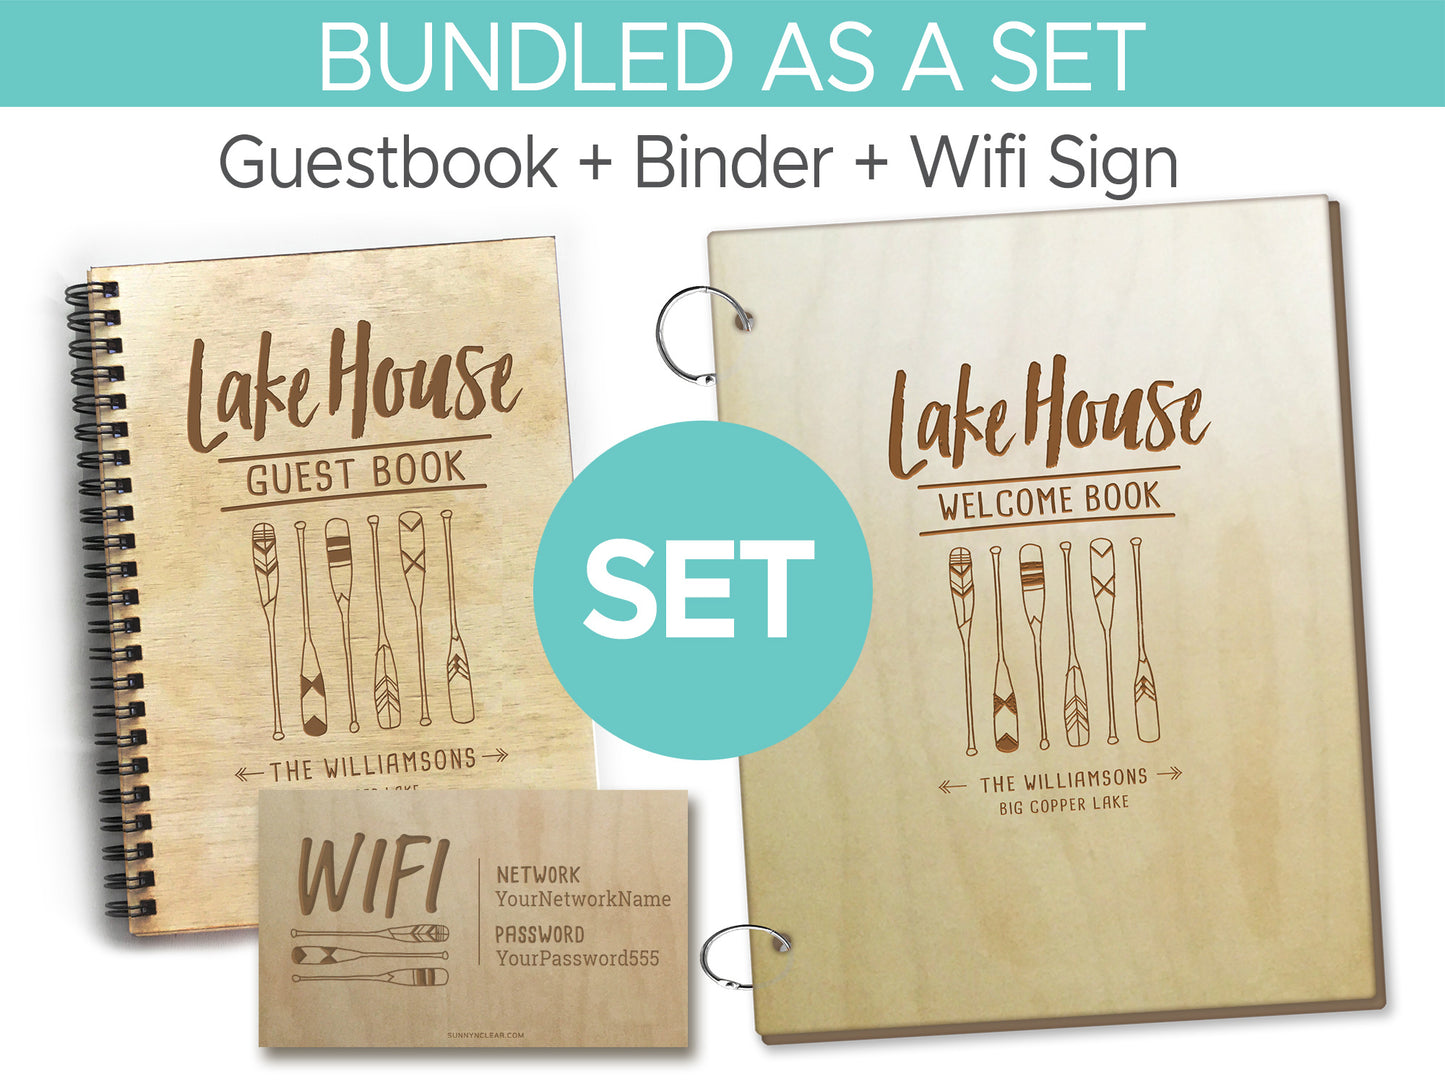 Welcome to My Home Guest book: AirBNB Guest Book (Guestbook for